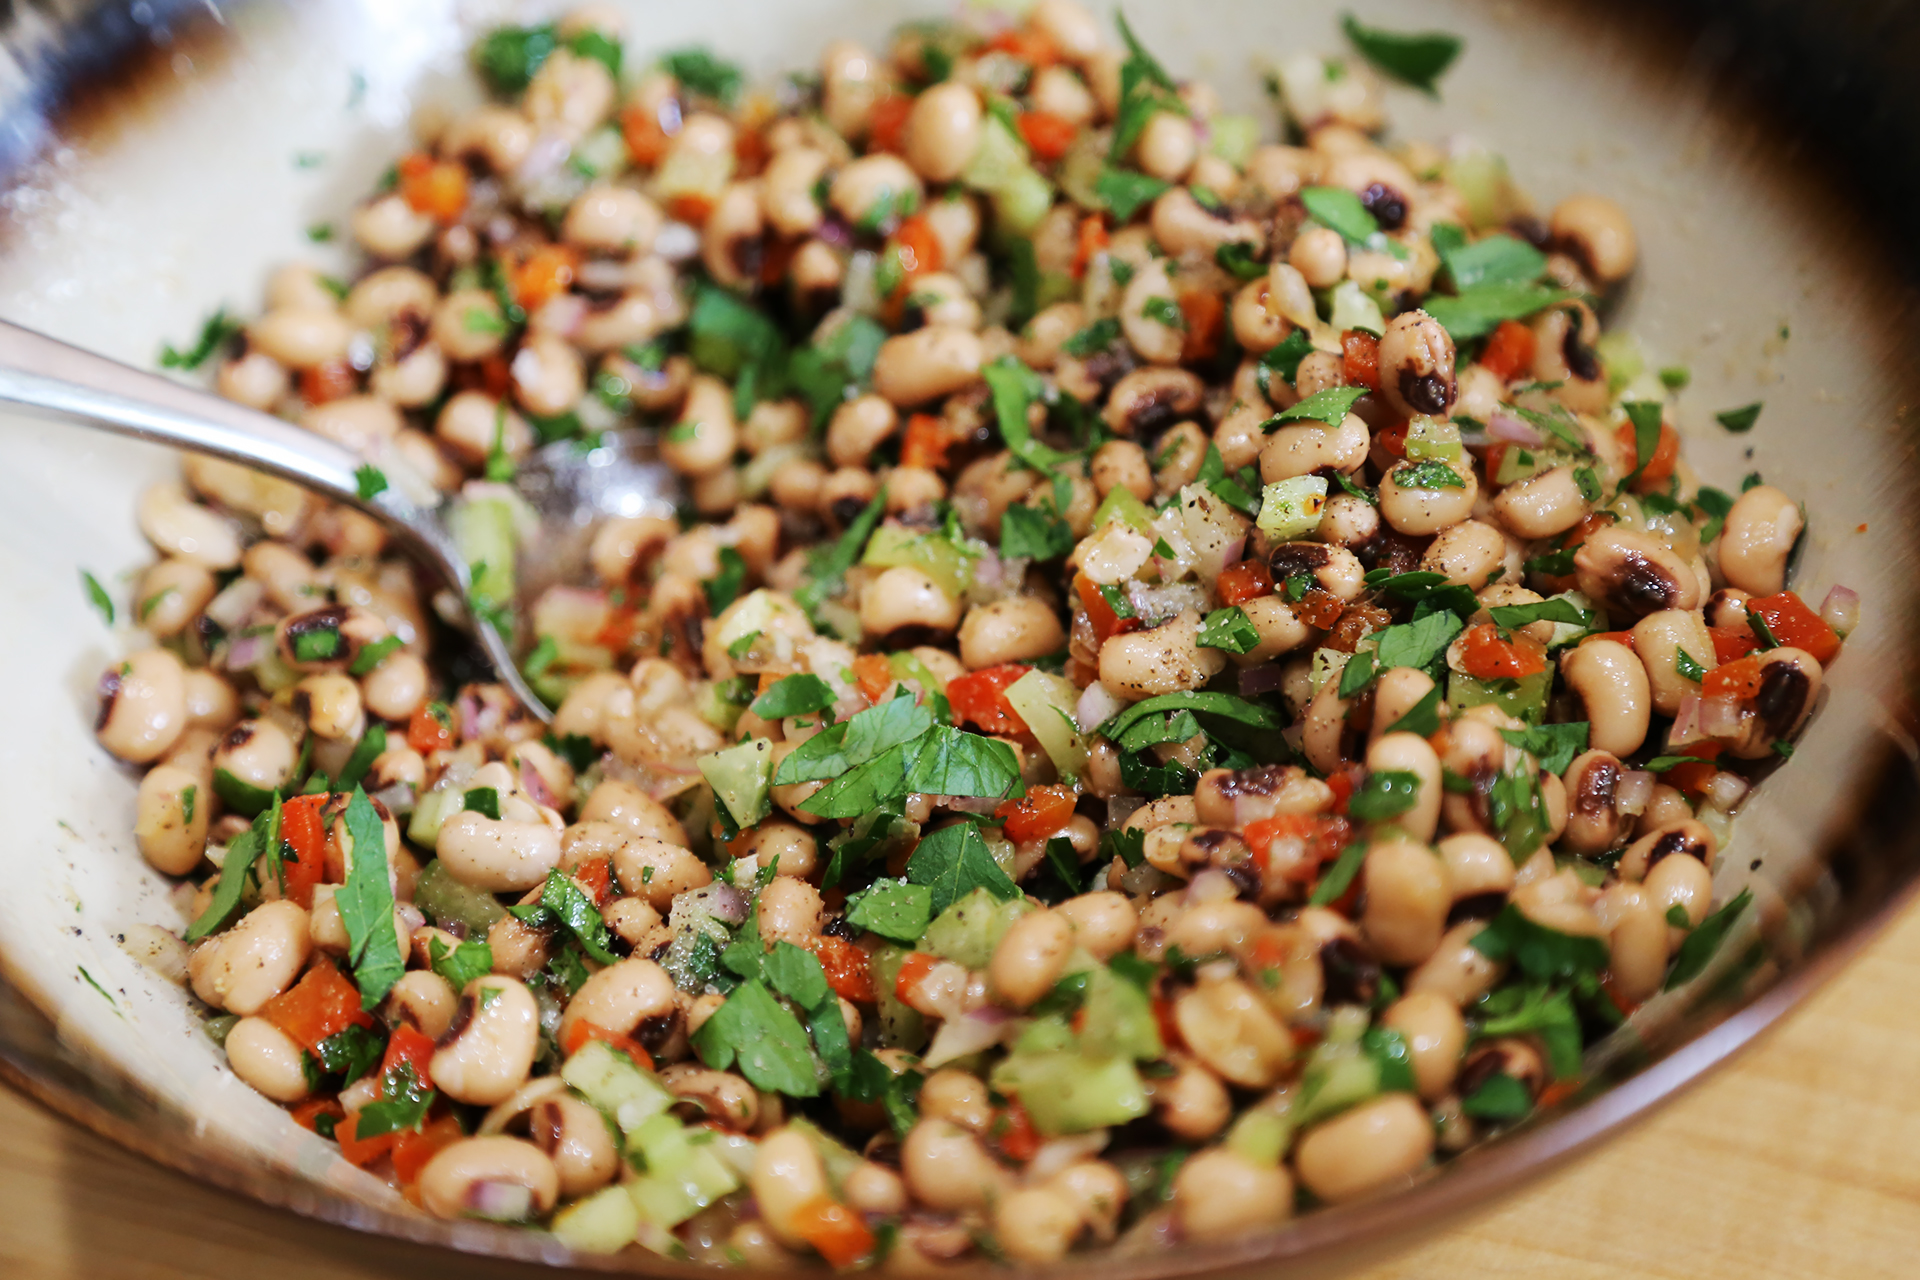 Garnish the Healthy Black-Eyed Pea Salad with some fresh parsley and serve.